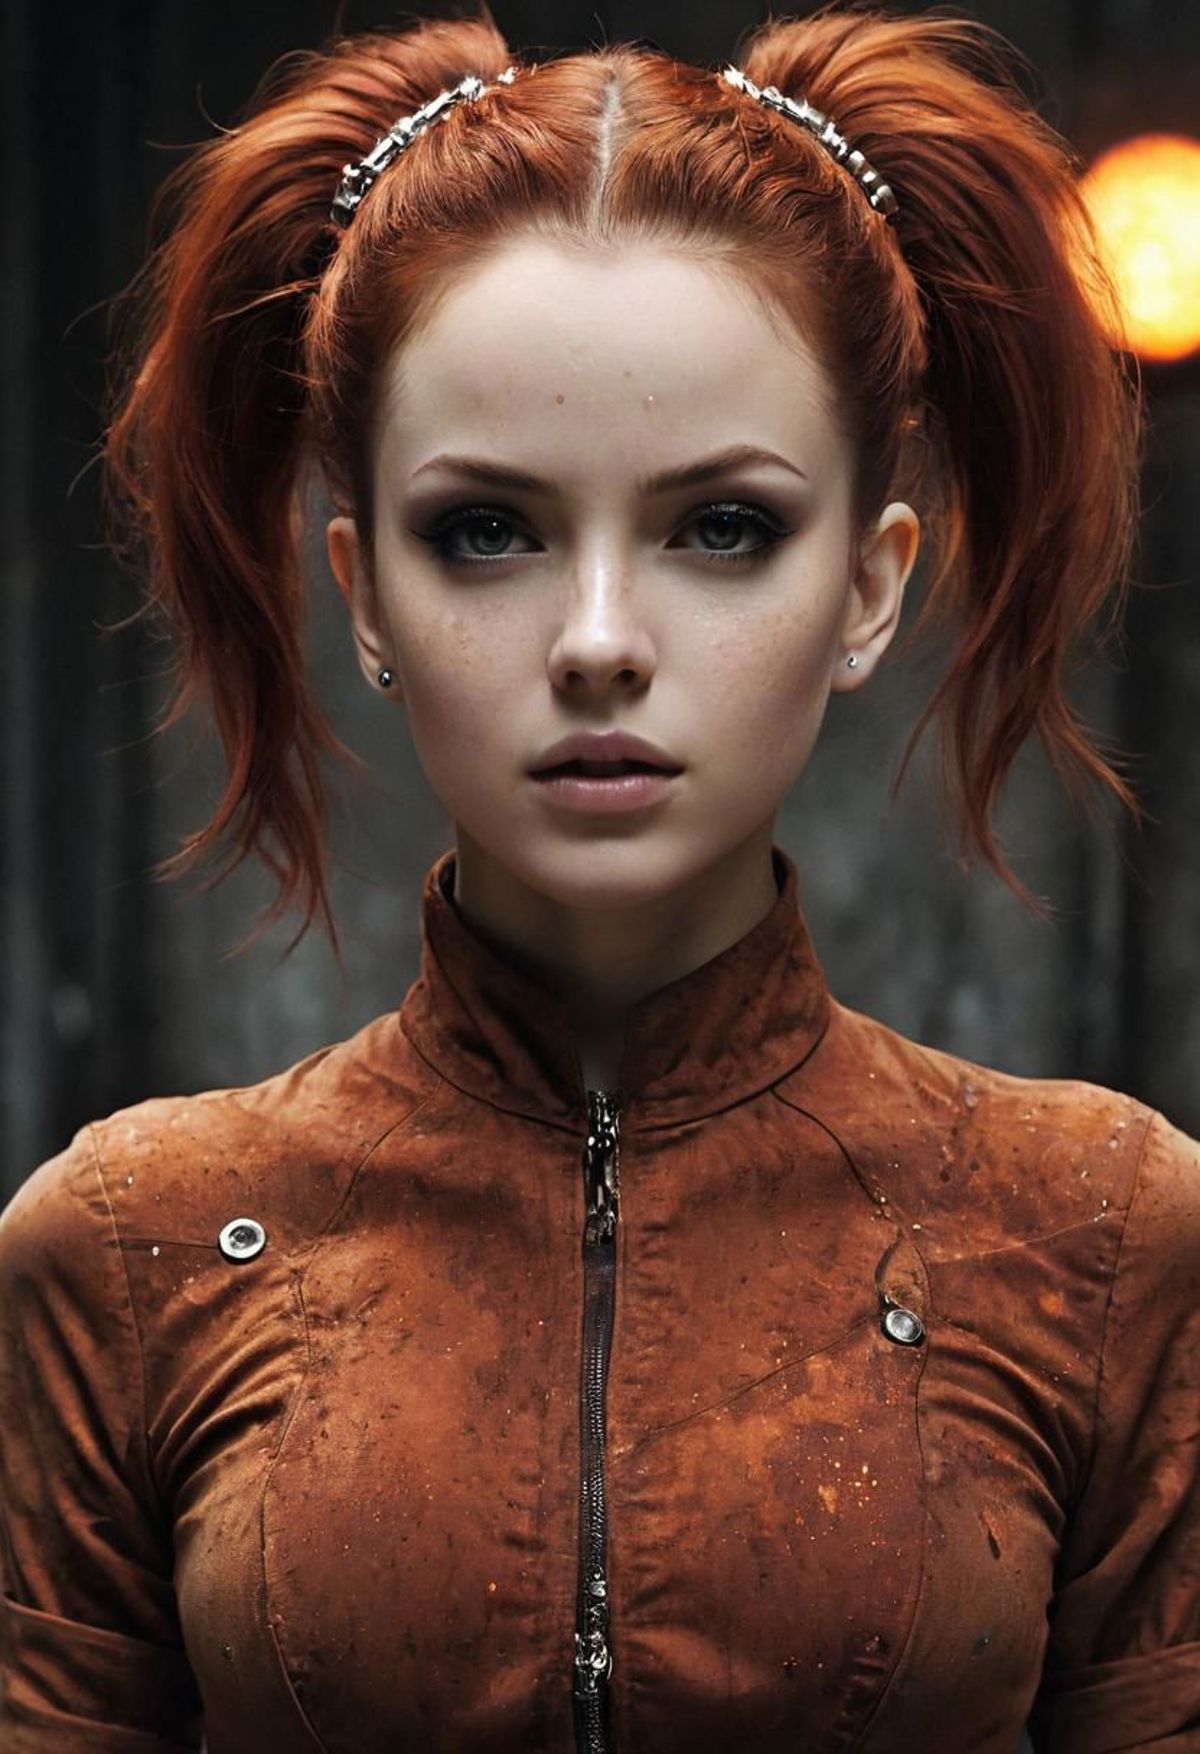 A young woman with red hair wearing a brown jacket and pigtails.